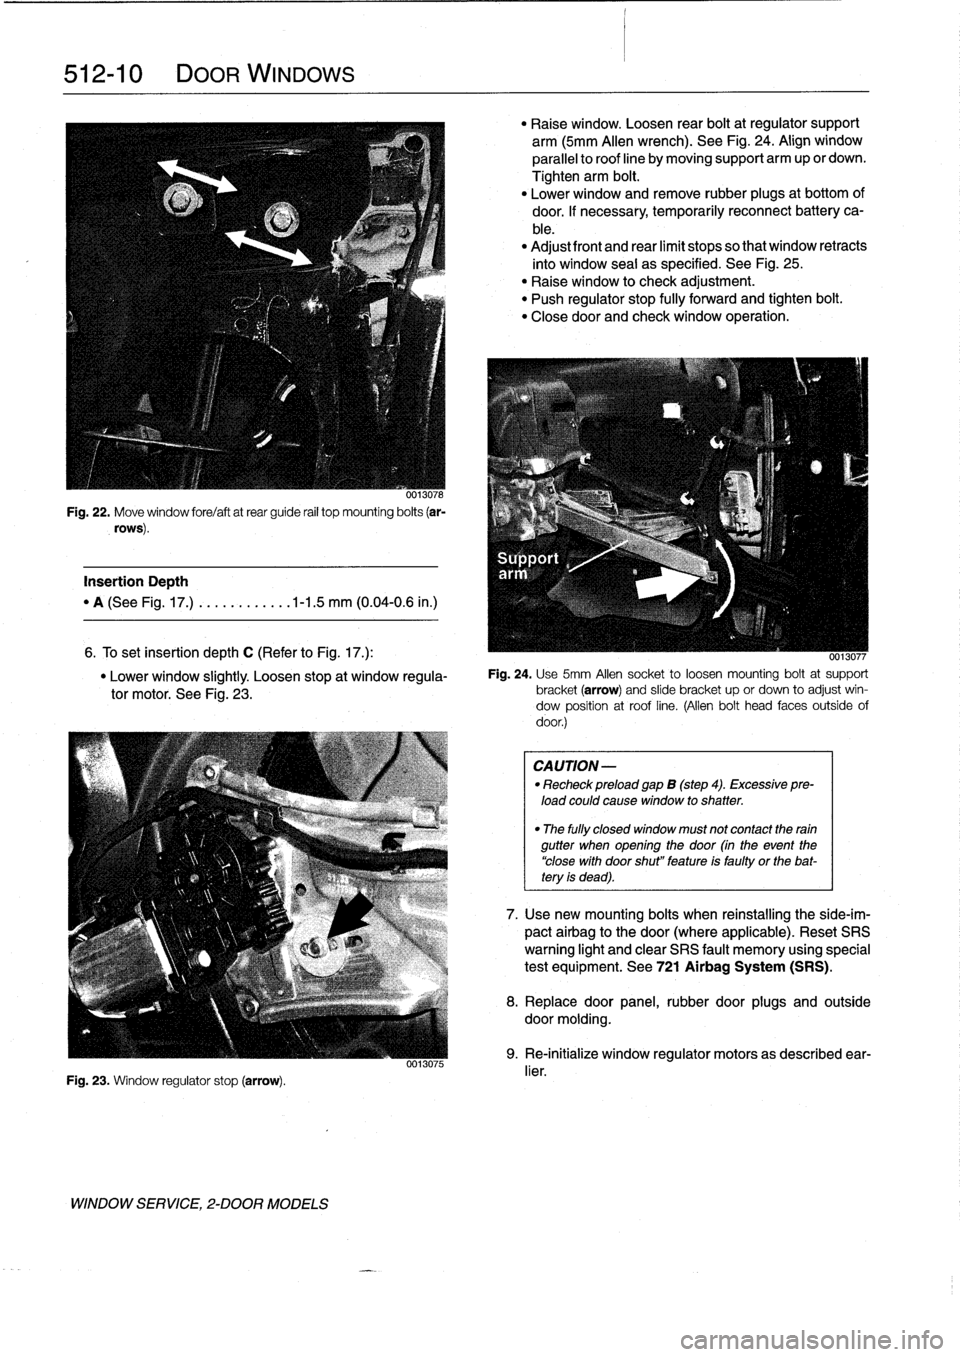 BMW 328i 1994 E36 Workshop Manual 
512-
1
0

	

DOOR
WINDOWS

0013078

Fig
.
22
.
Move
window
fore/aftatrear
guide
rail
top
mounting
bolts
(ar-

rows)
.

Insertion
Depth

"
A
(See
Fig
.
17
.)
.
..........
.1-1
.5
mm
(0
.04-0
.6
in
.)
